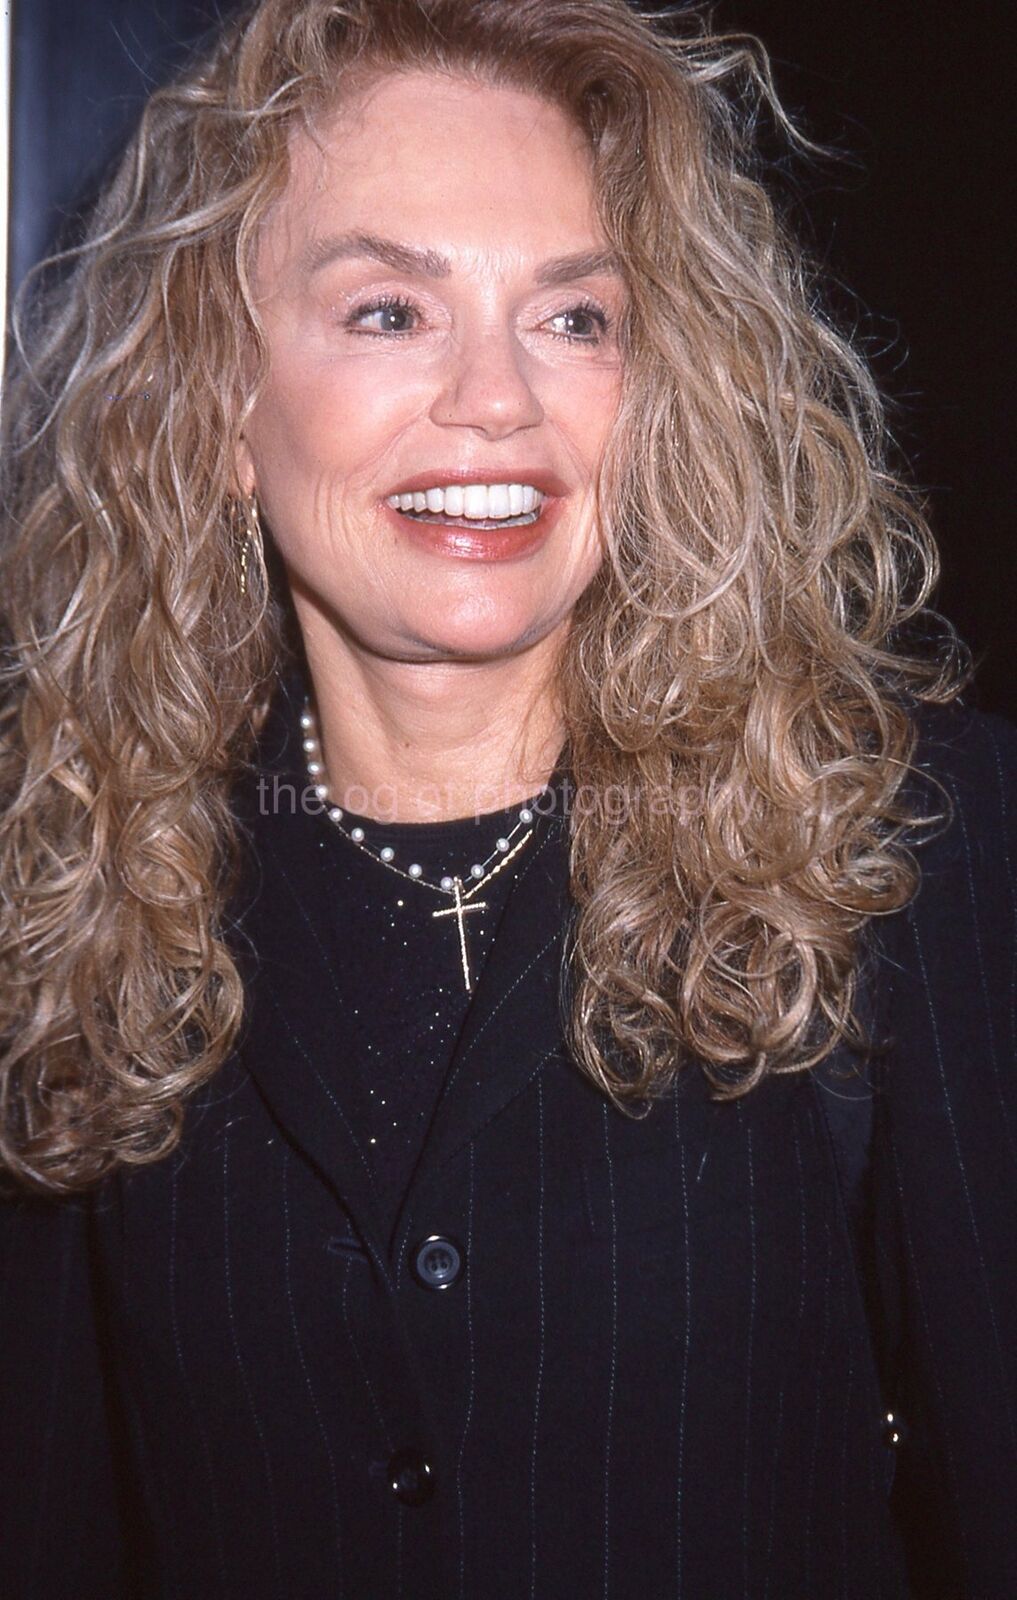 DYAN CANNON Vintage 35mm FOUND SLIDE Transparency FILM ACTRESS Photo 010 T 13 O